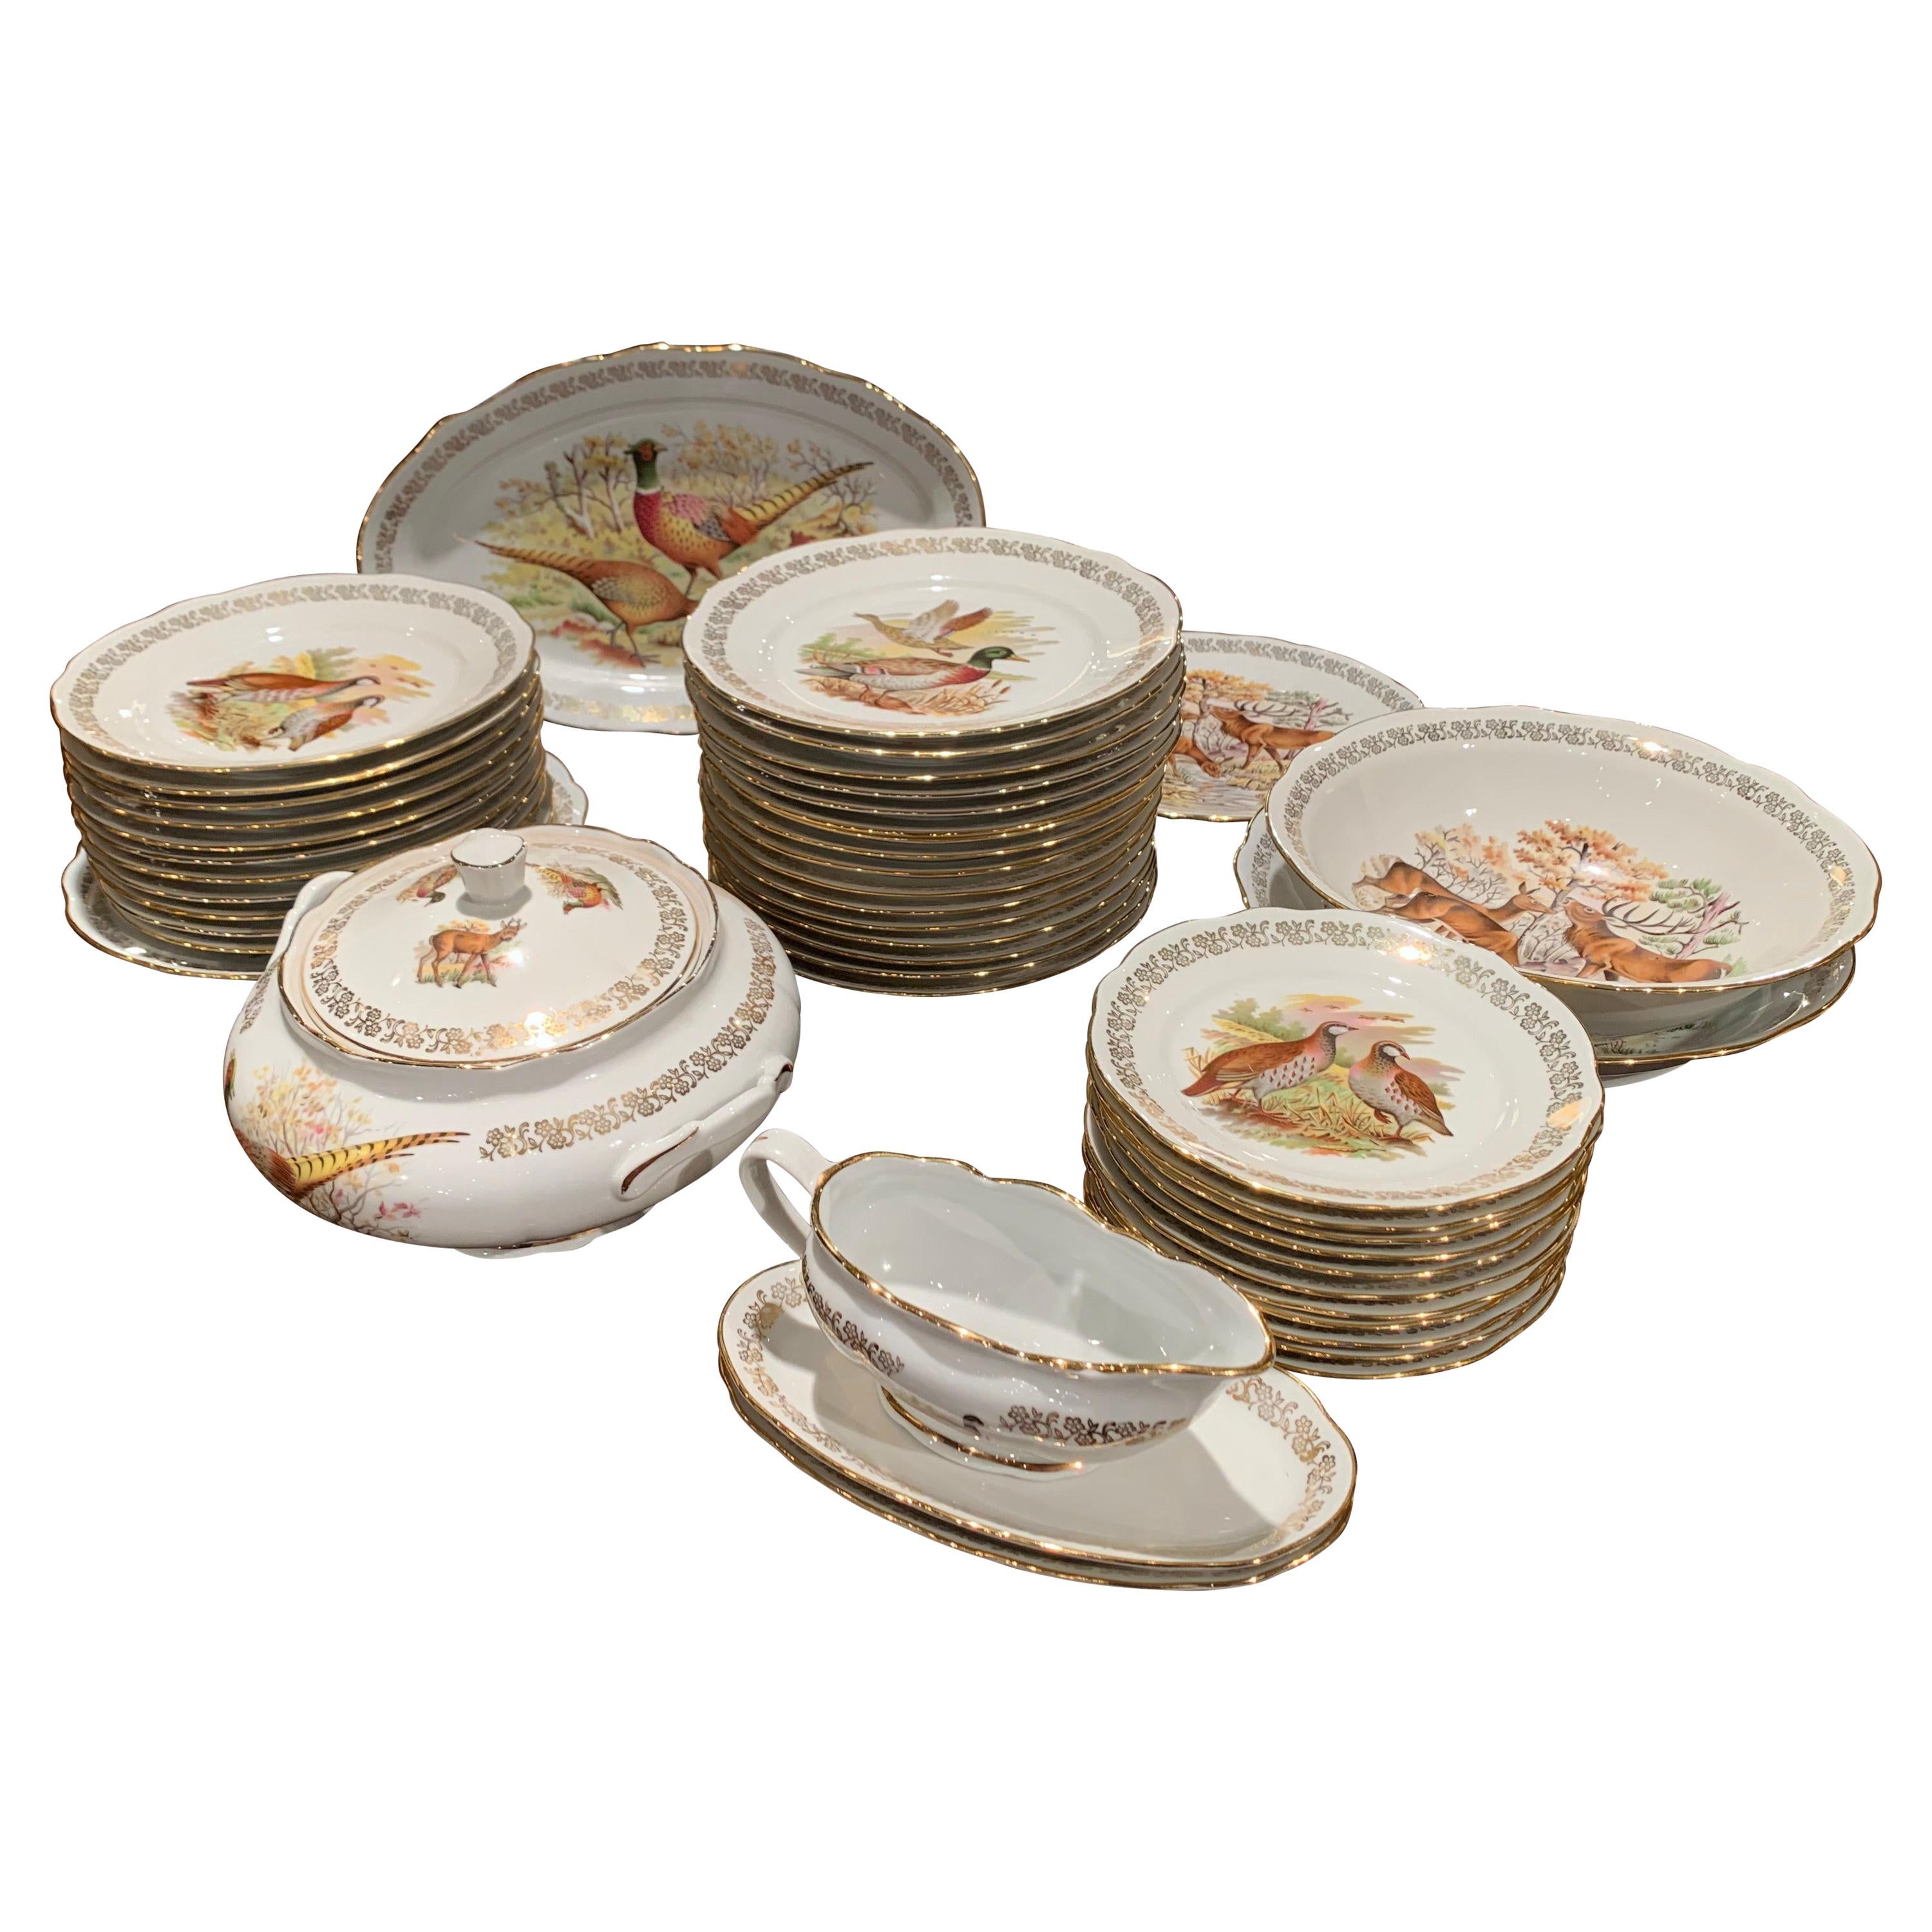 Midcentury French Hand Painted Porcelain and Gilt Hunt Motifs Dinnerware Set